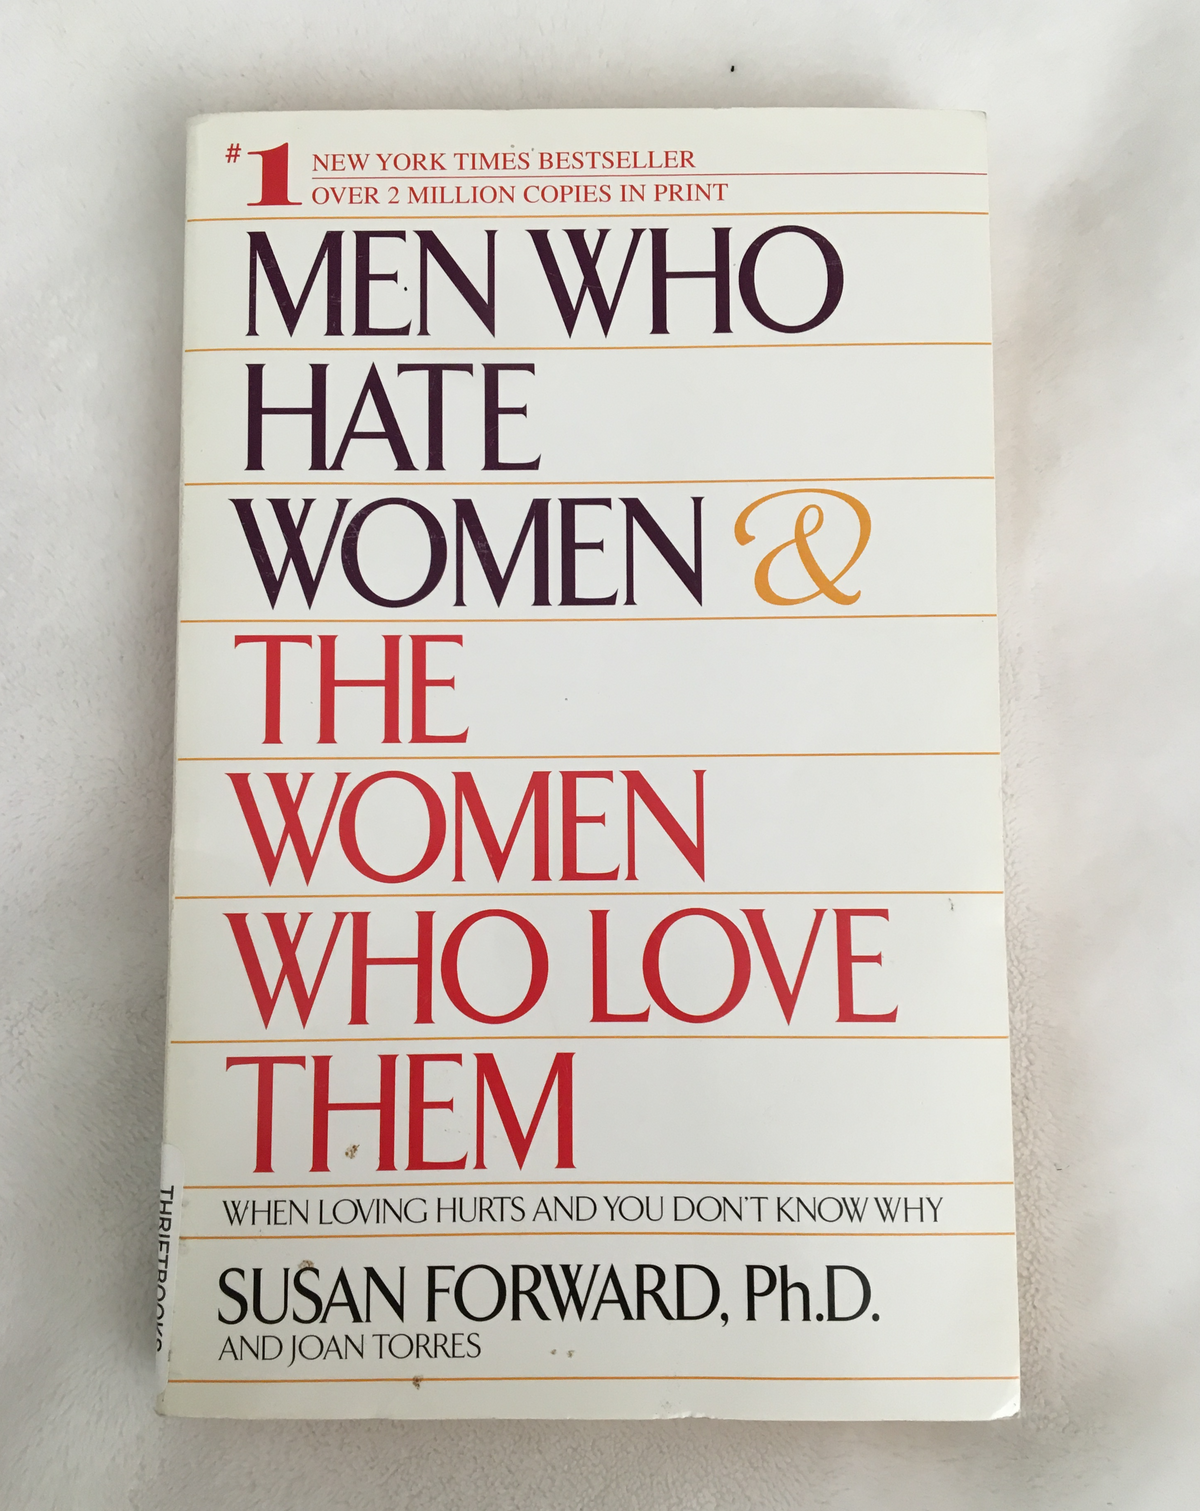 Men Who Hate Women and the Women Who Love Them by Susan Forward, book, Ten Dollar Books, Ten Dollar Books